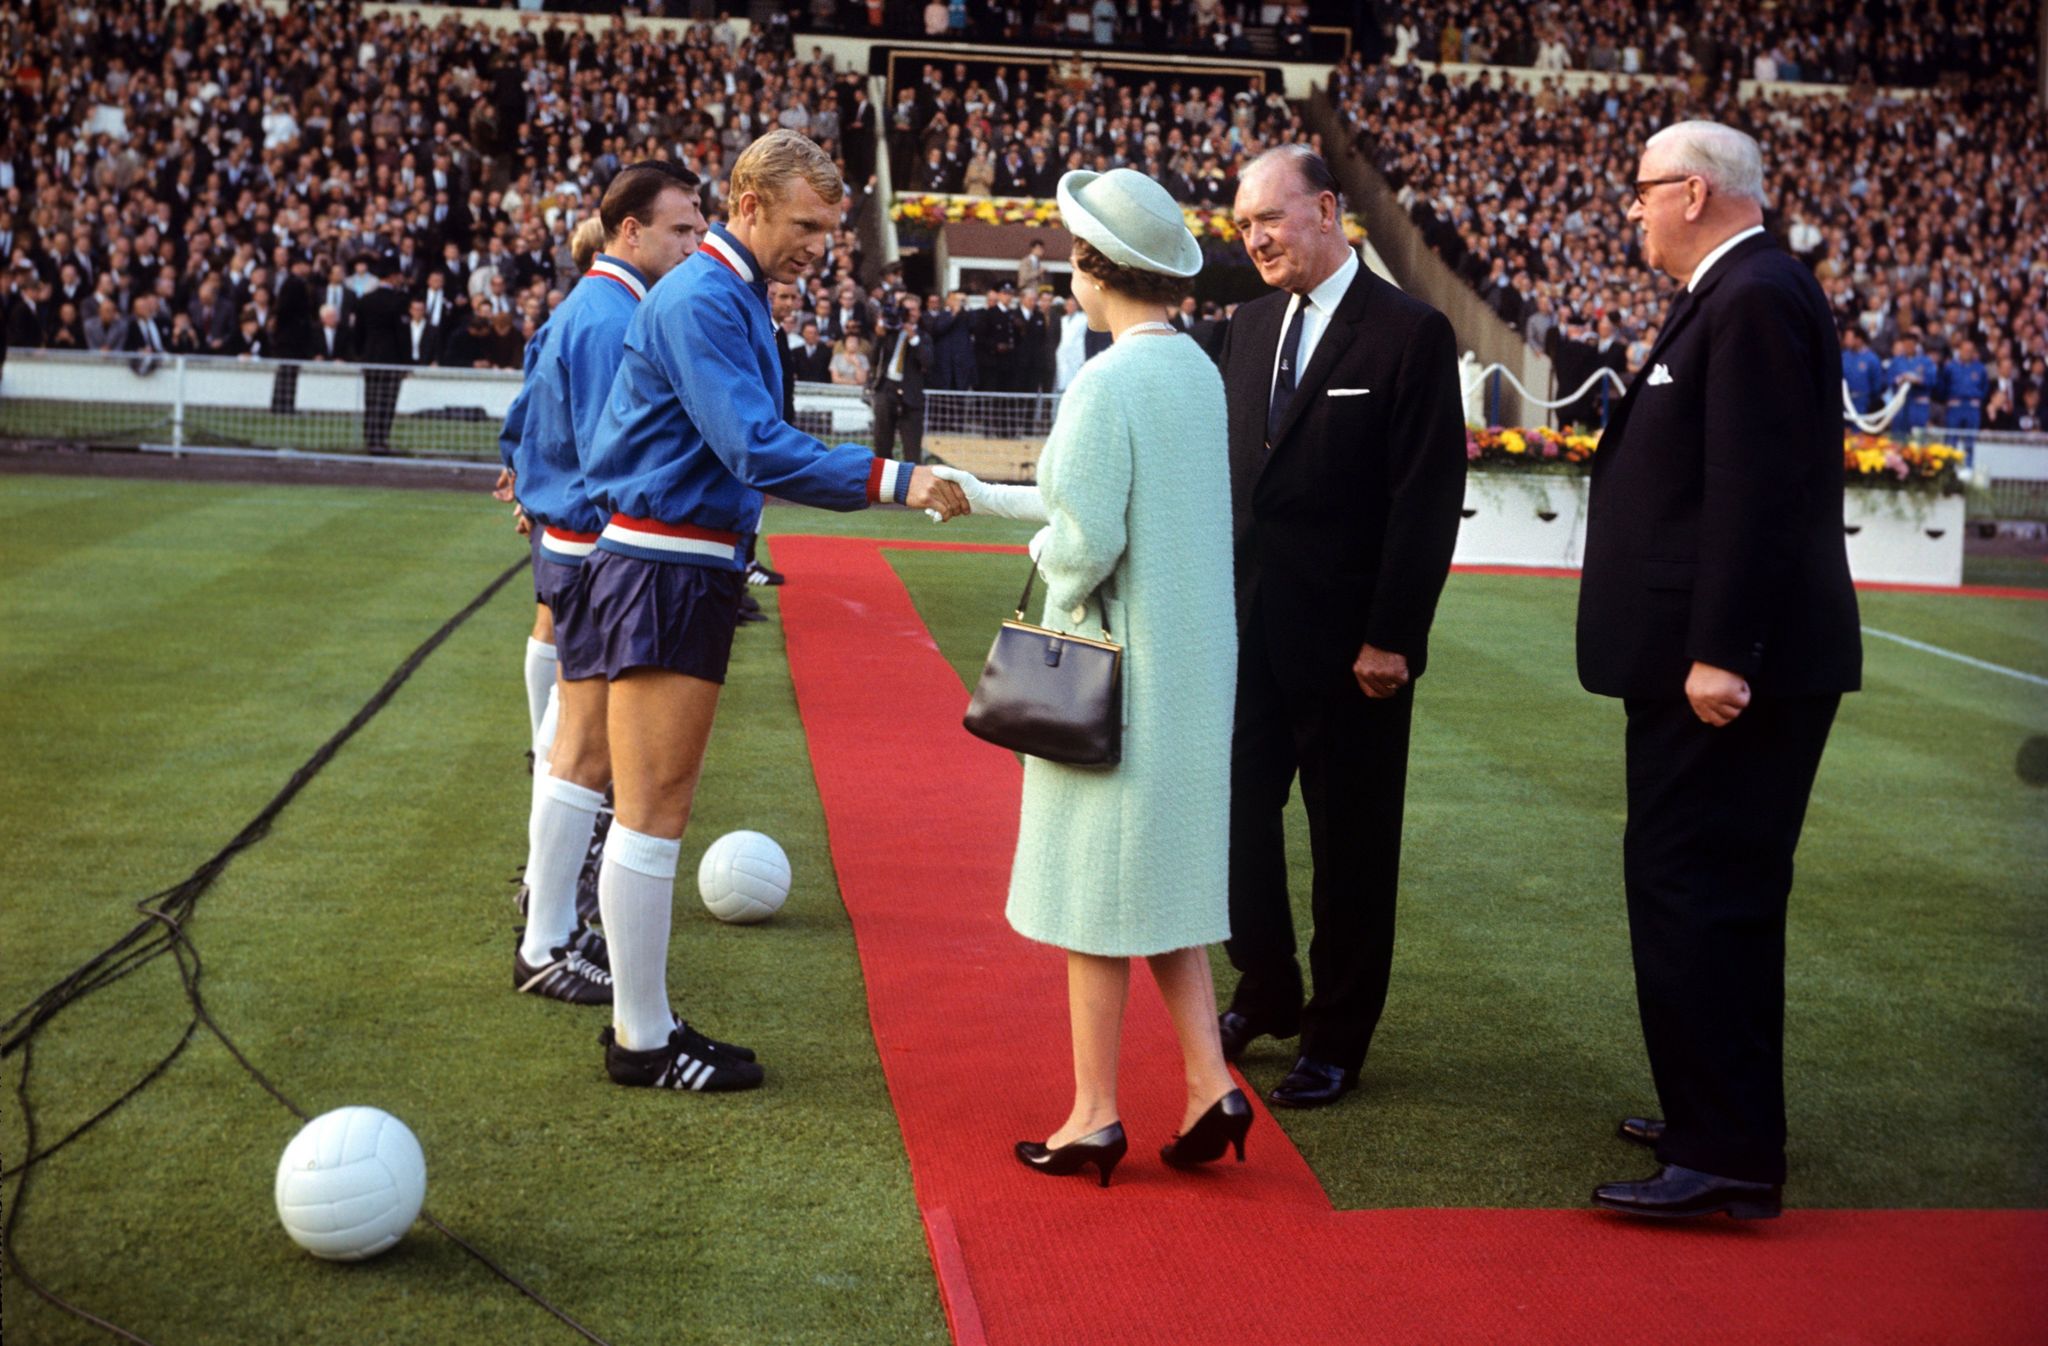 H.M. Queen meets England captain Bobby Moore before kick off at FIFA World Cup England 1966 - Opening Match - Group One - England v Uruguay - Wembley Stadium